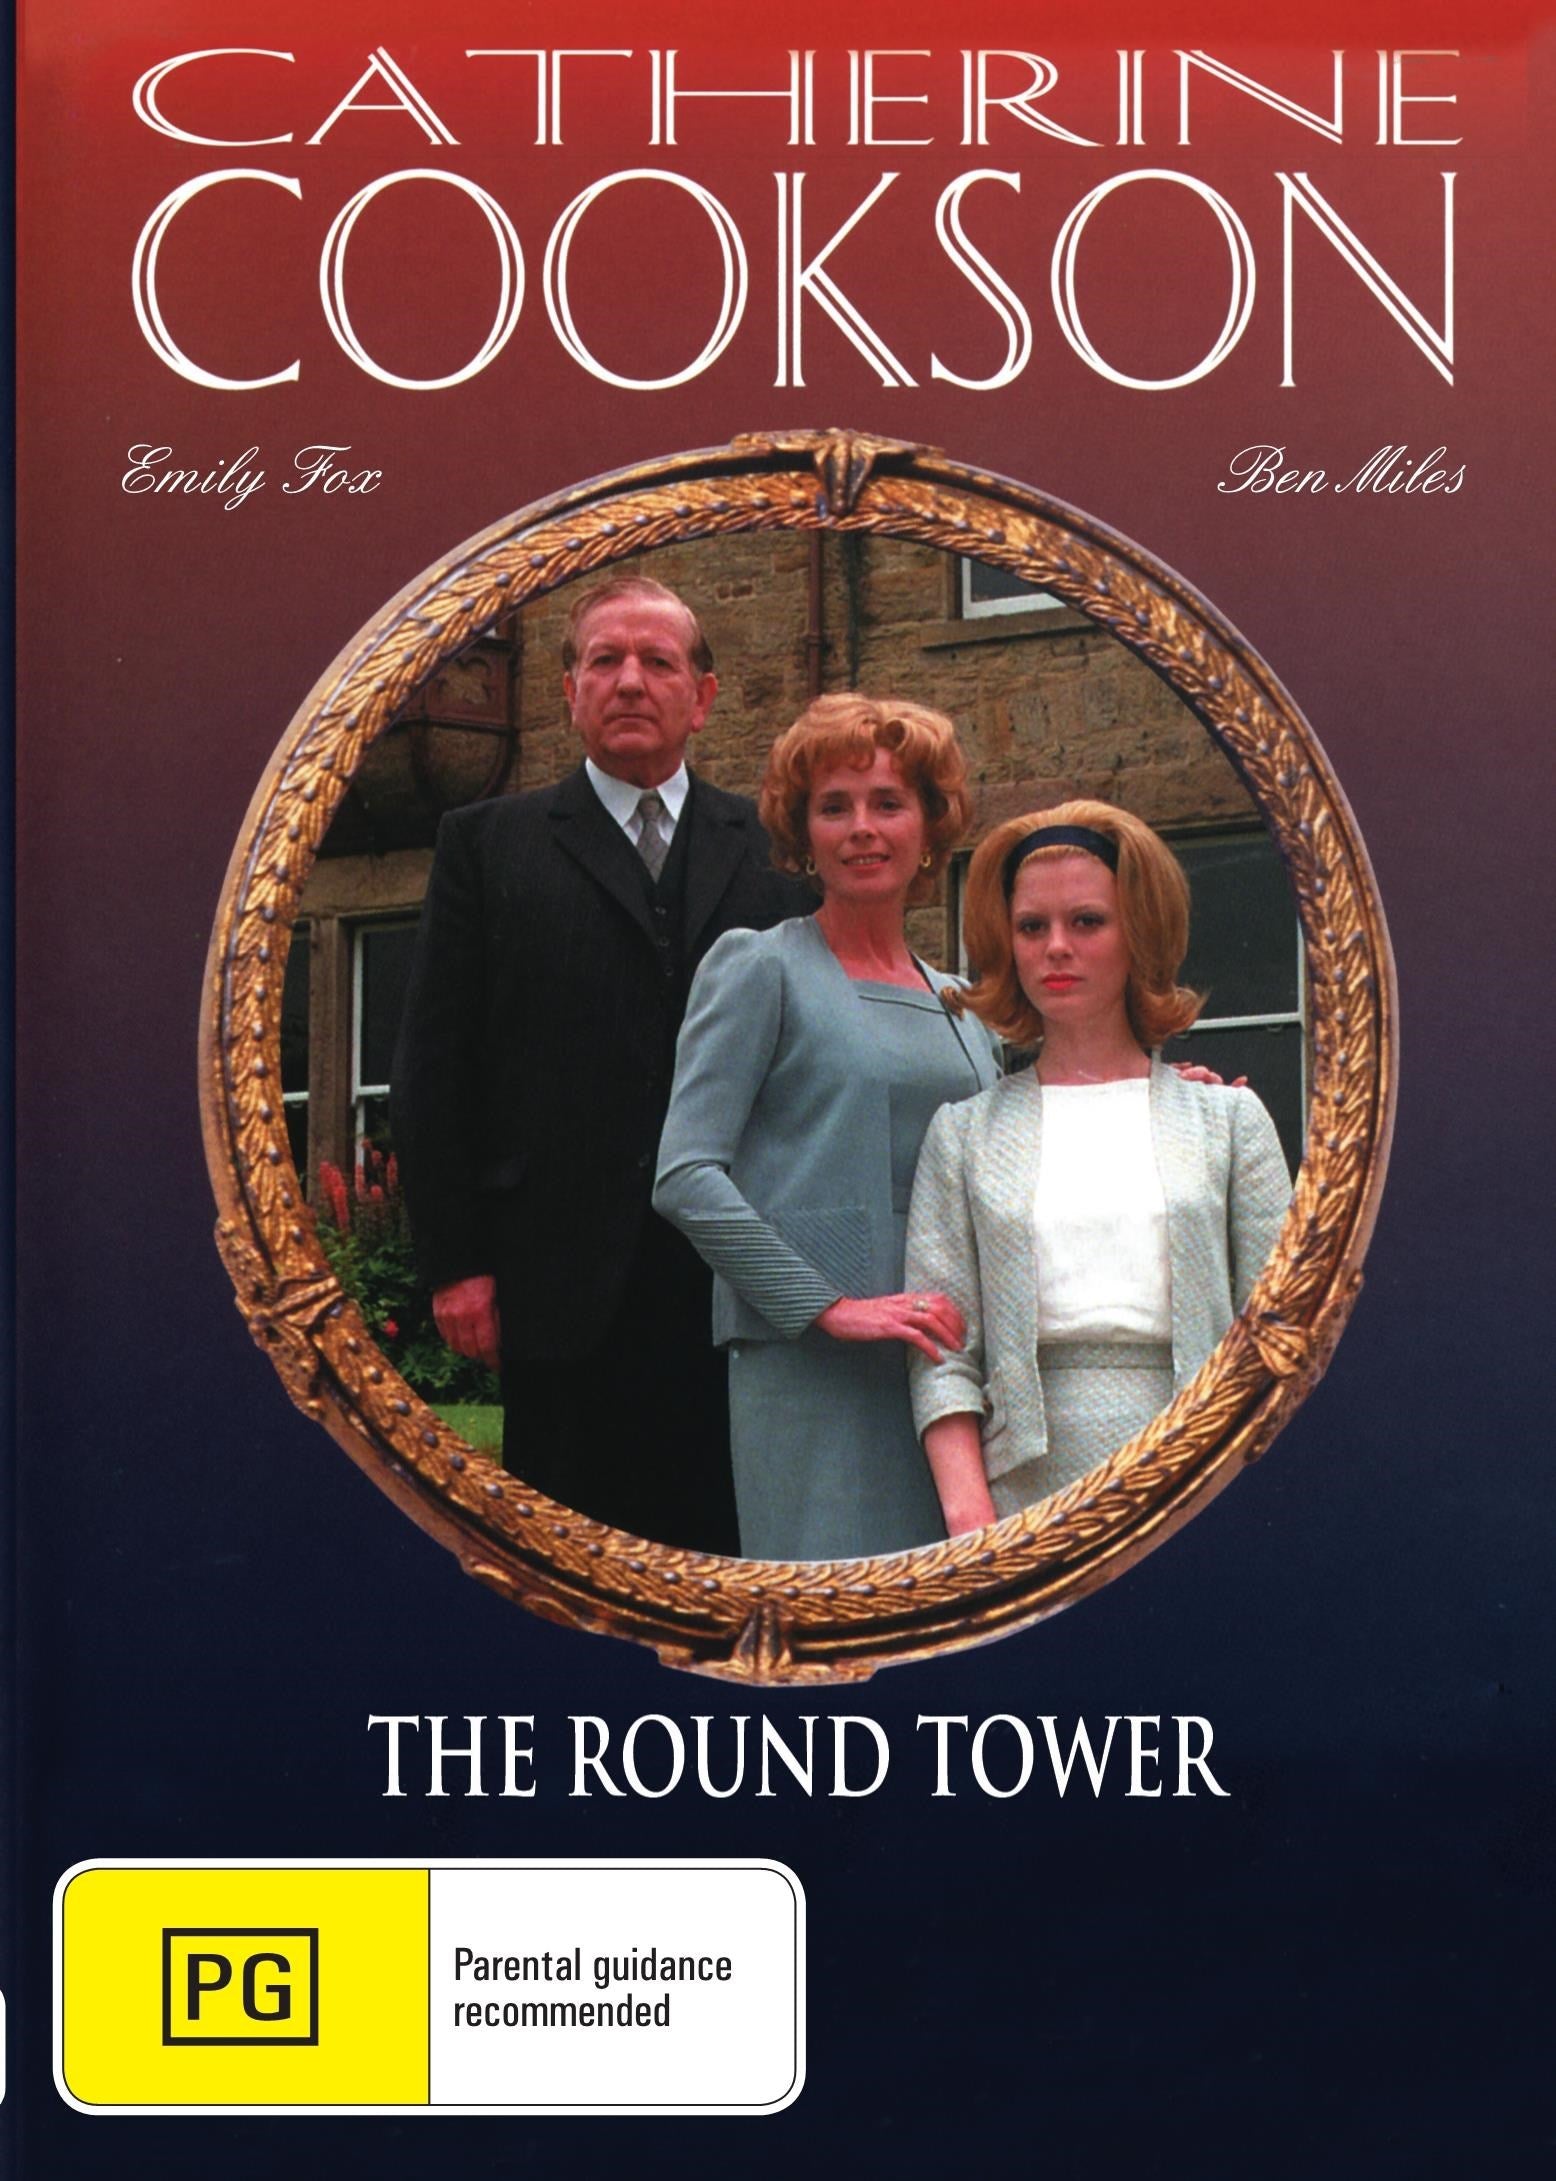 The Round Tower  rareandcollectibledvds